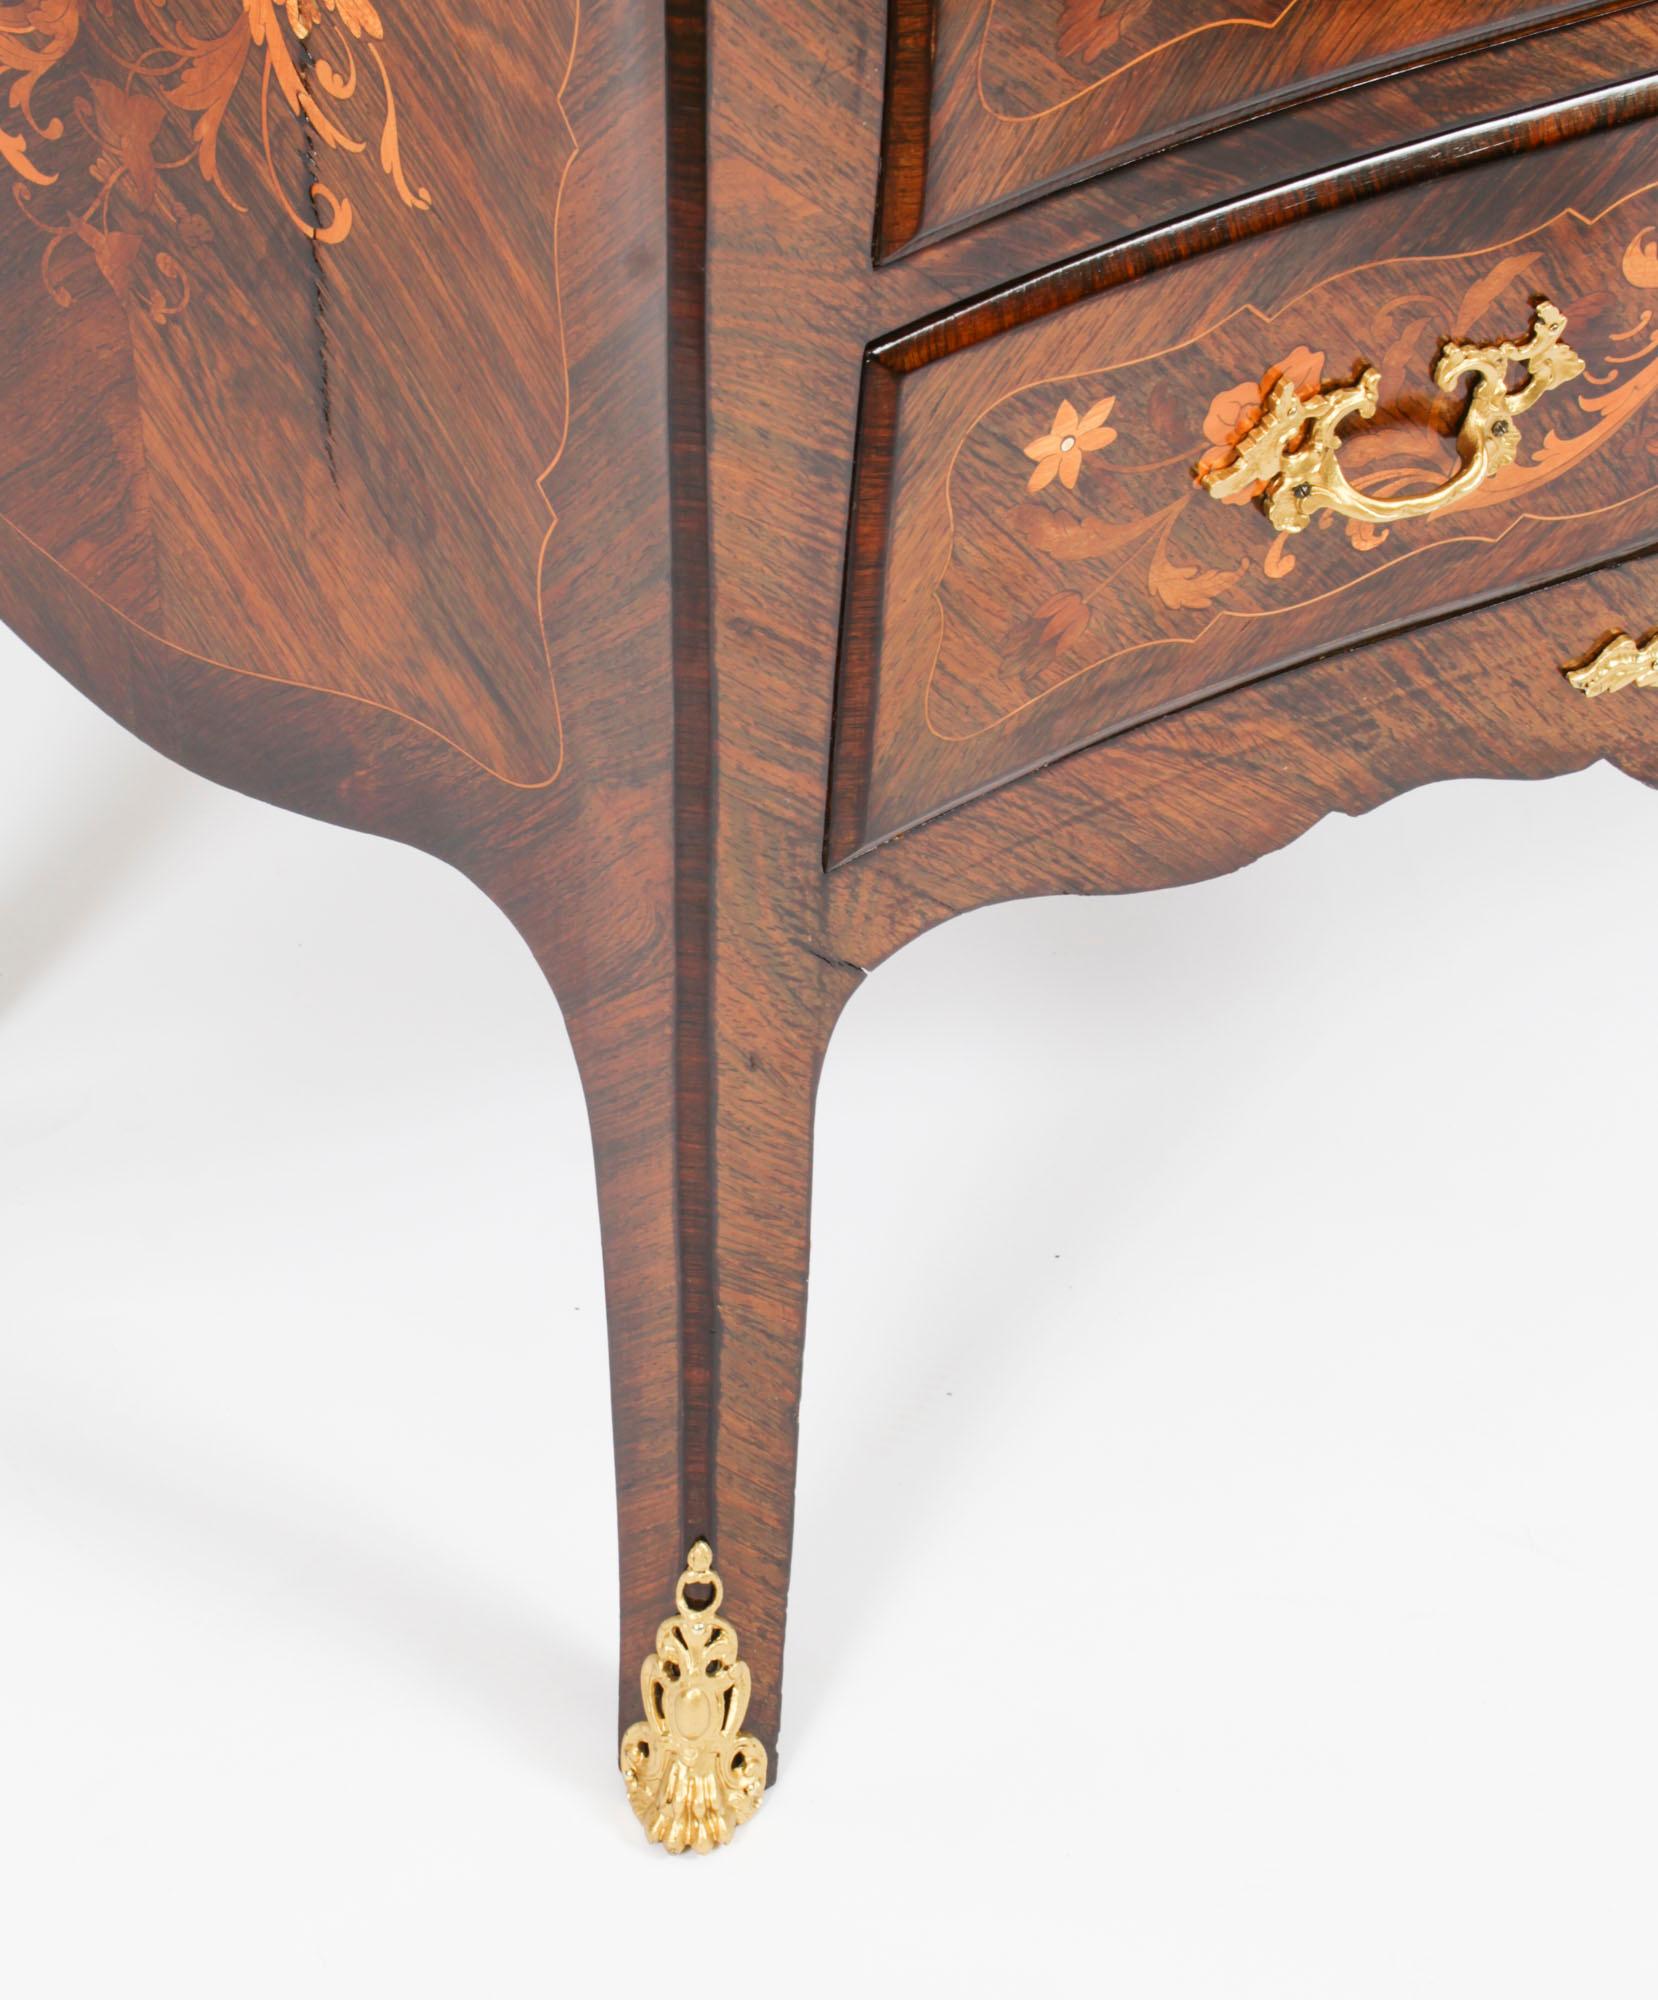 Antique French Louis Revival Marquetry Commode Chest of Drawers 19th Century For Sale 9